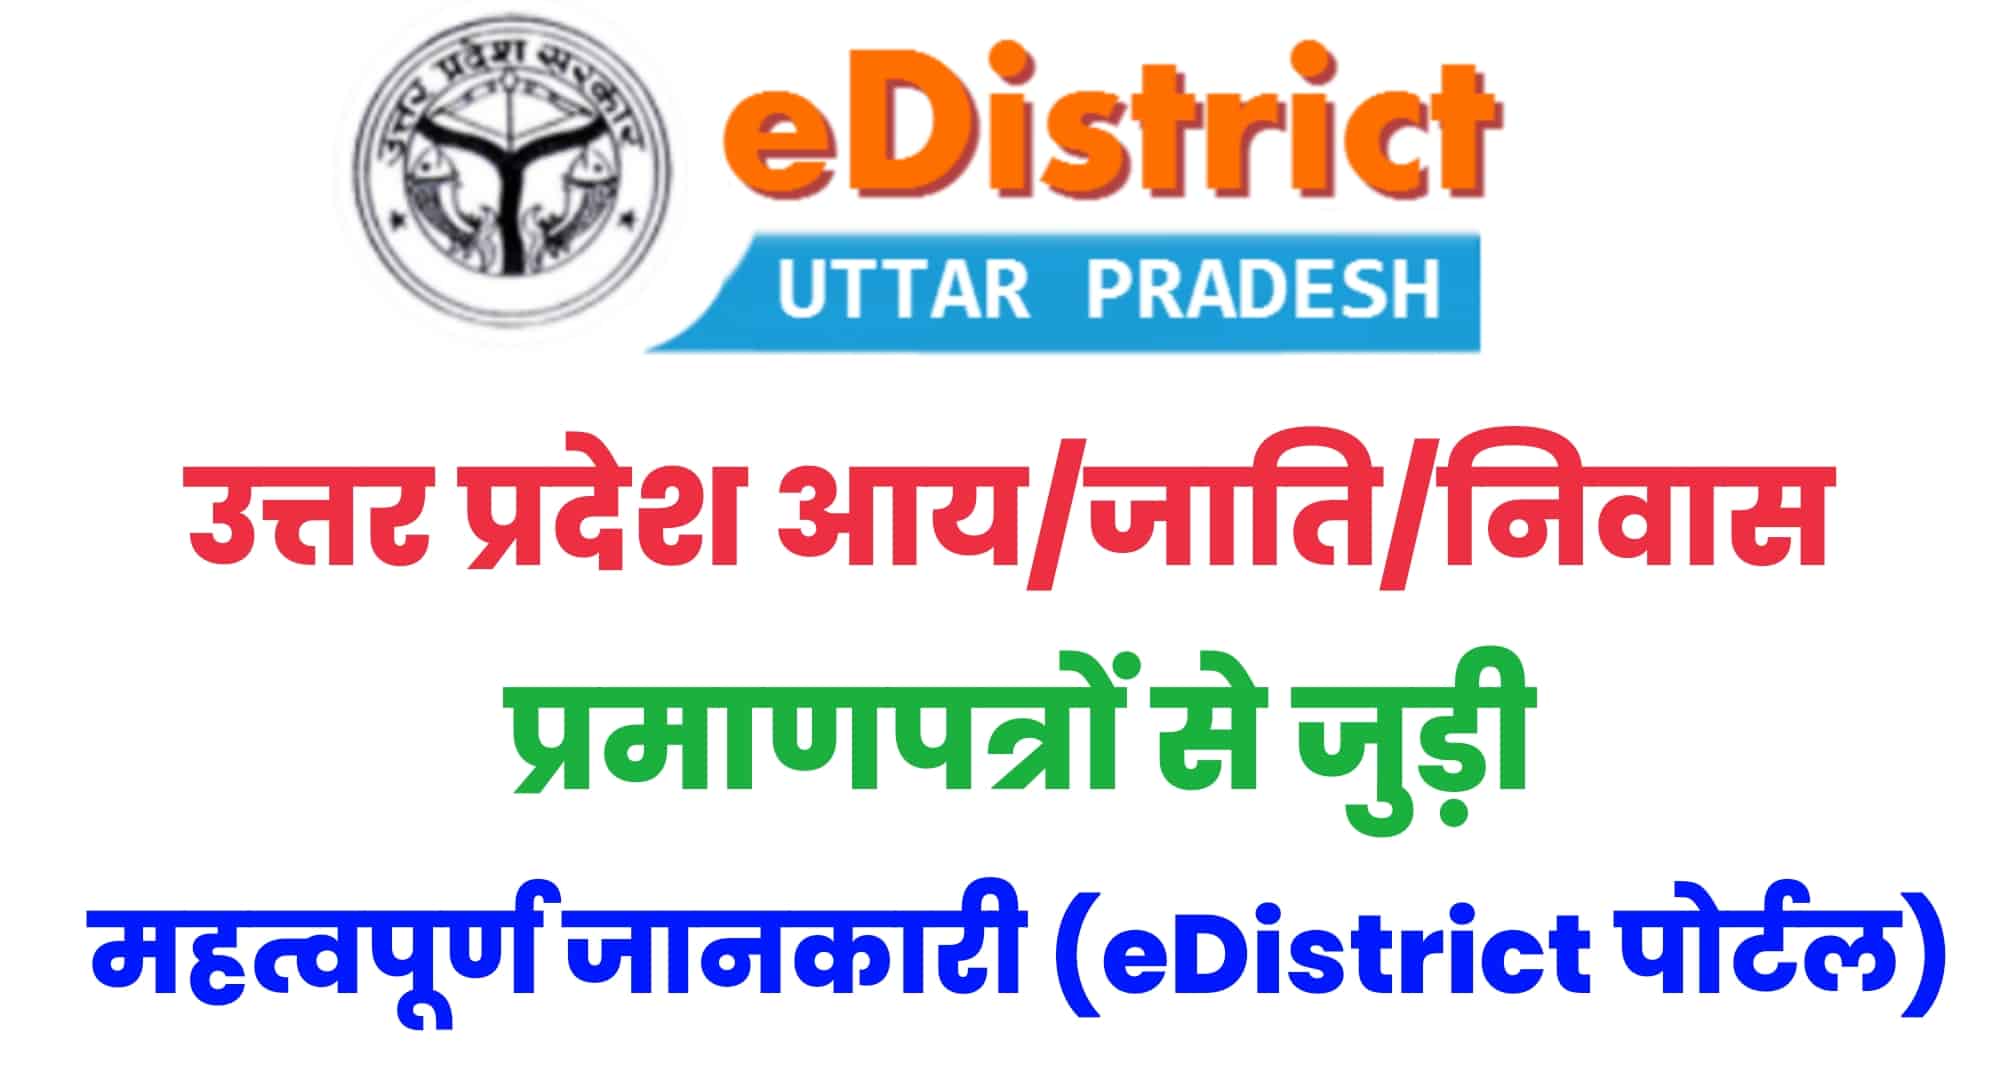 What is the importance of registering Domicile in UP State with eDistrict?